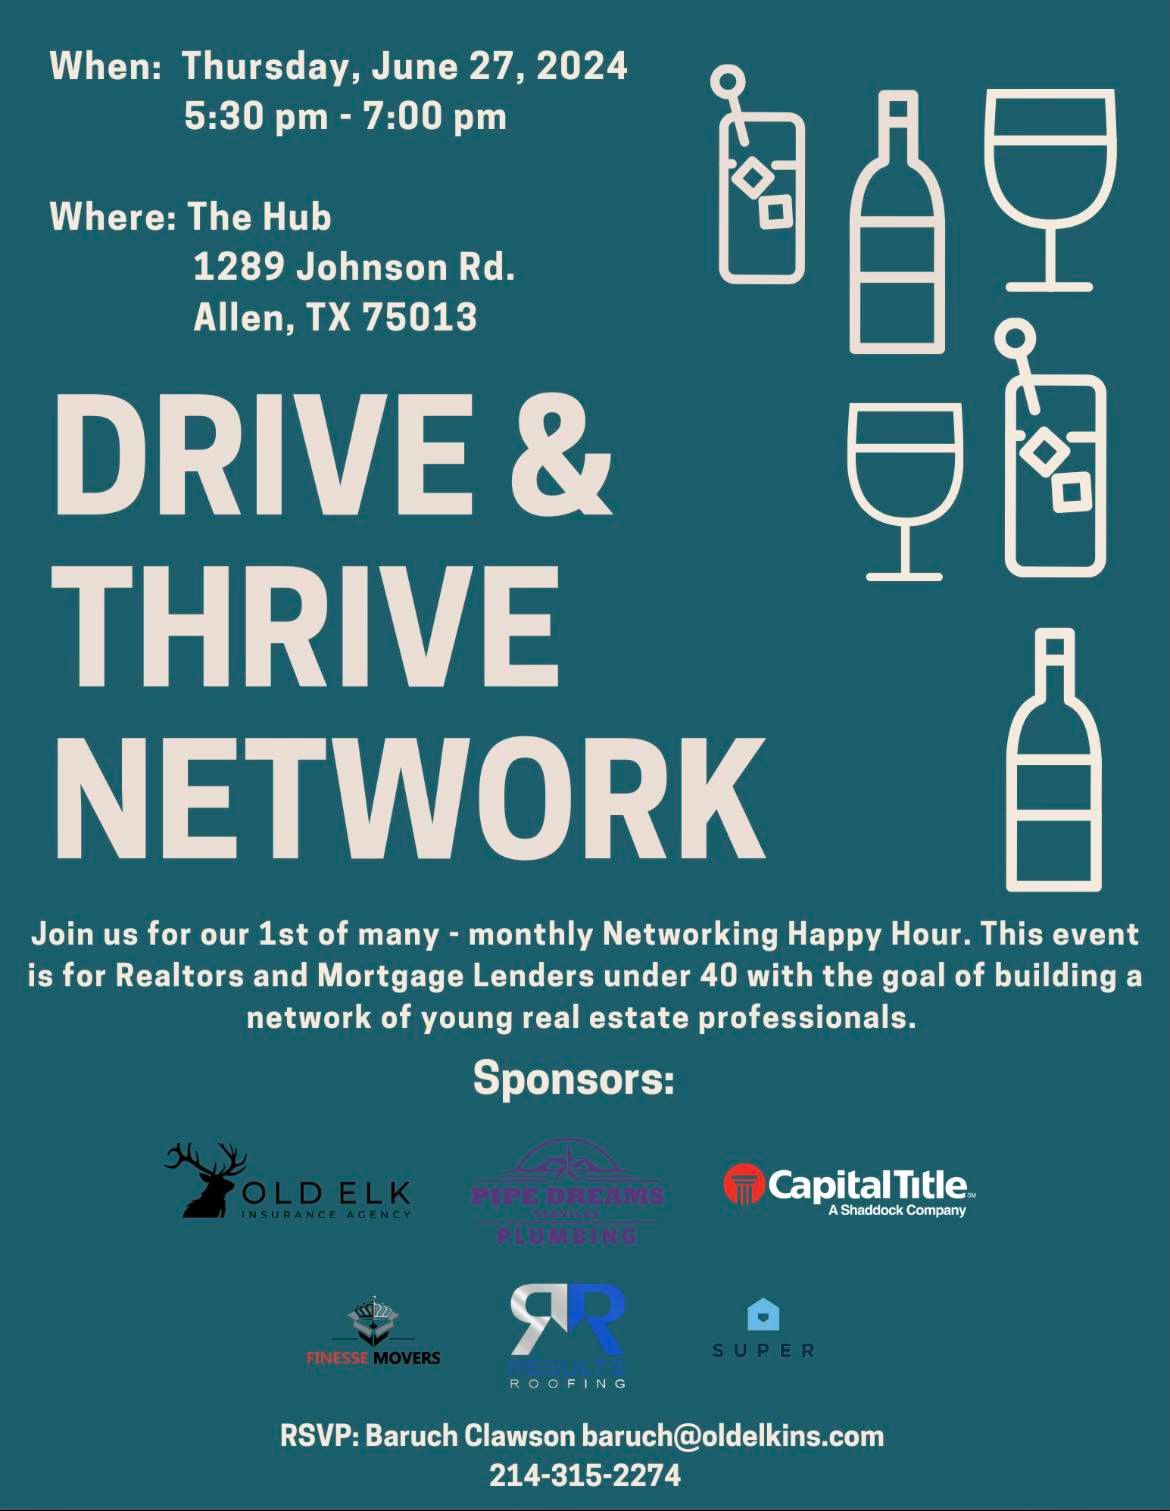 Drive & Thrive Network - 1st Monthly Networking Happy Hour!!